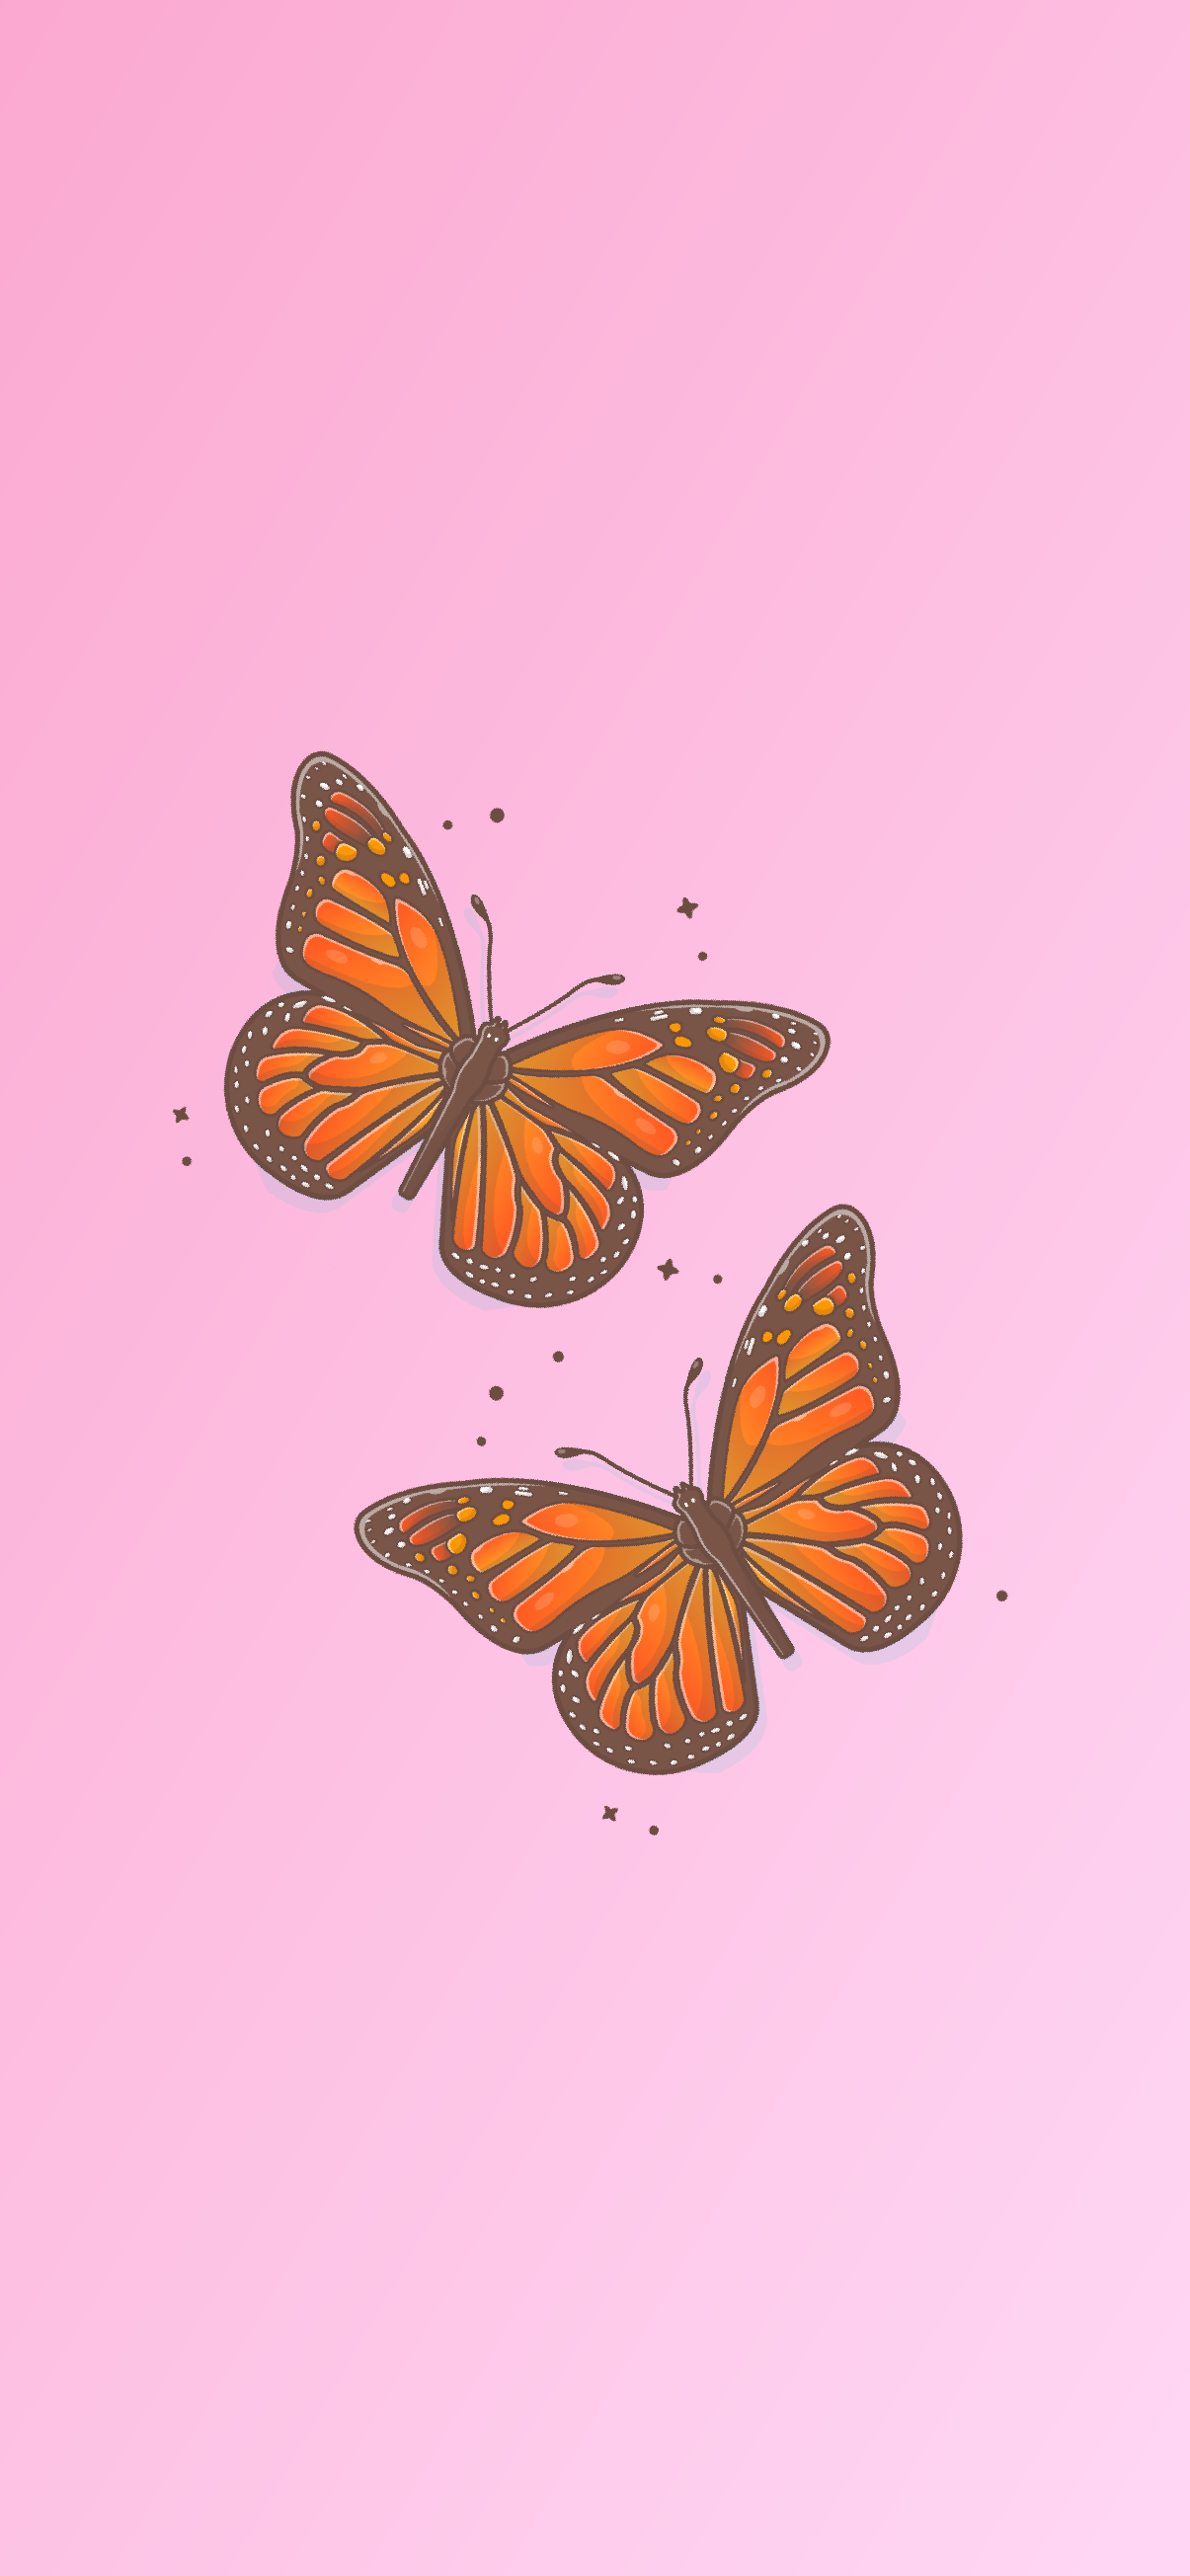 Butterfly iphone wallpapers